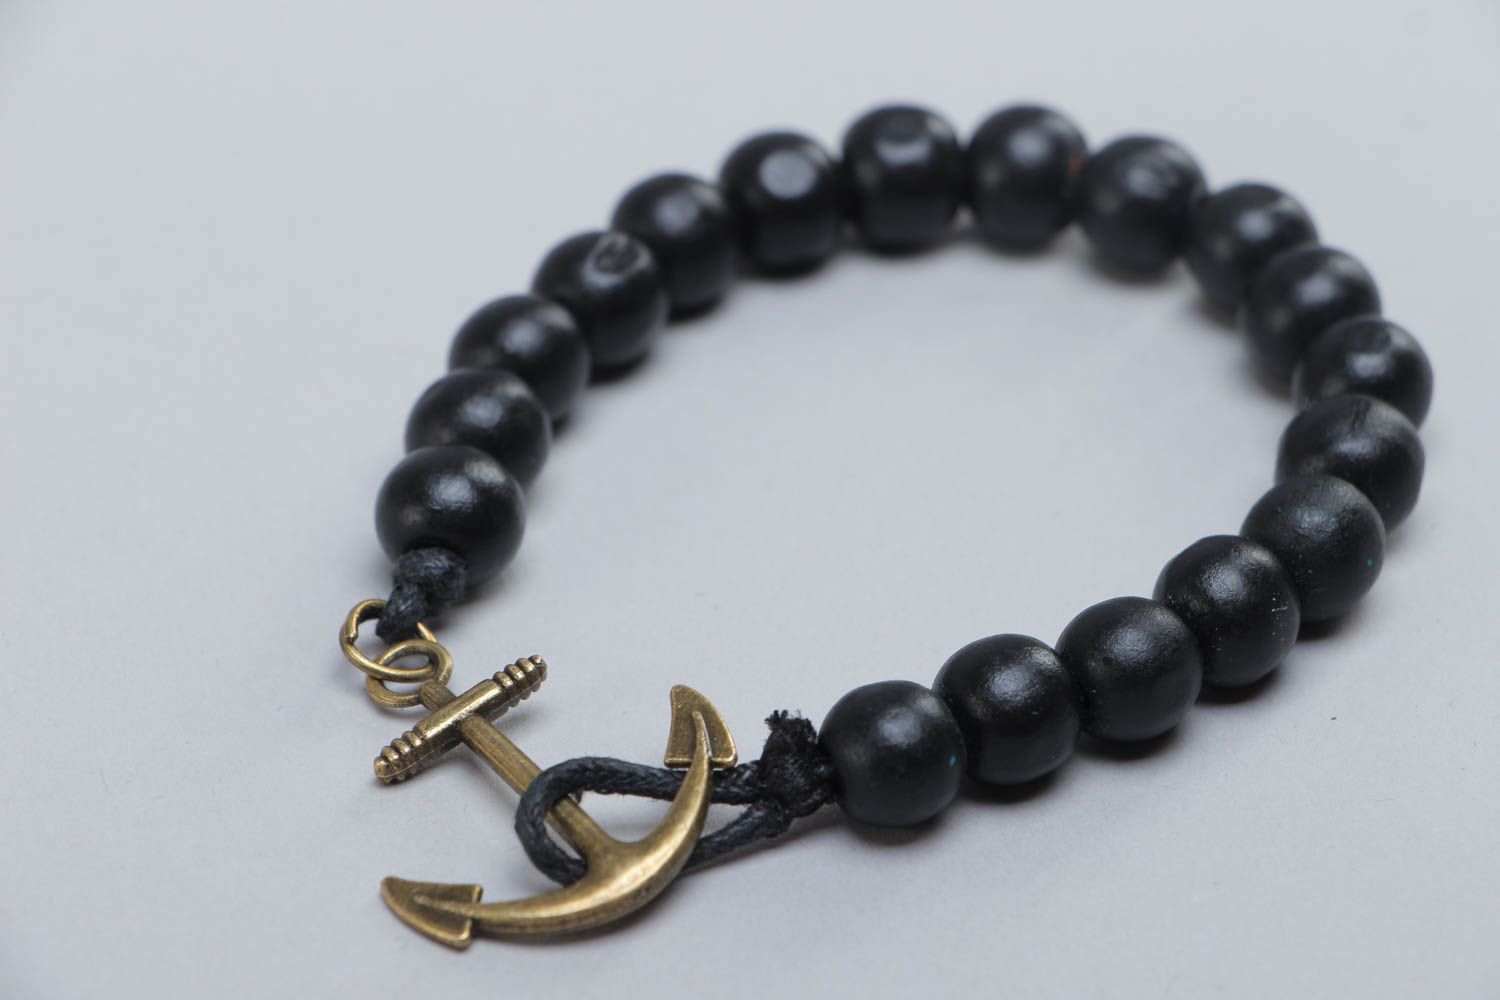 Handmade stylish black bracelet made of wooden beads with metal anchor photo 3